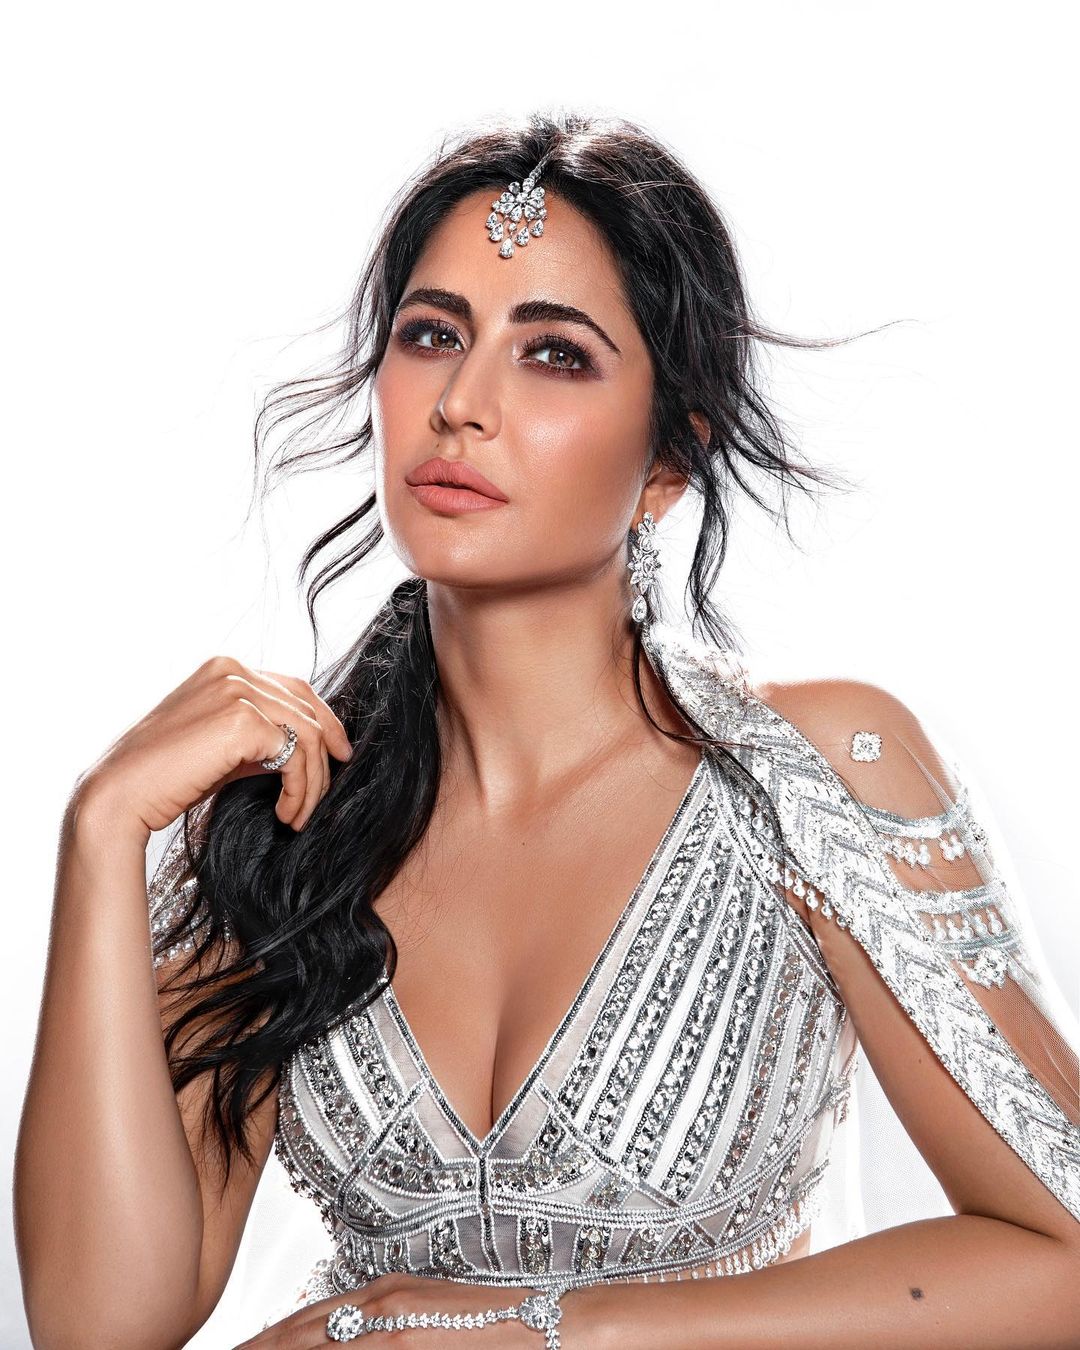 Katrina Kaif's dancing statue to unveil on March 27